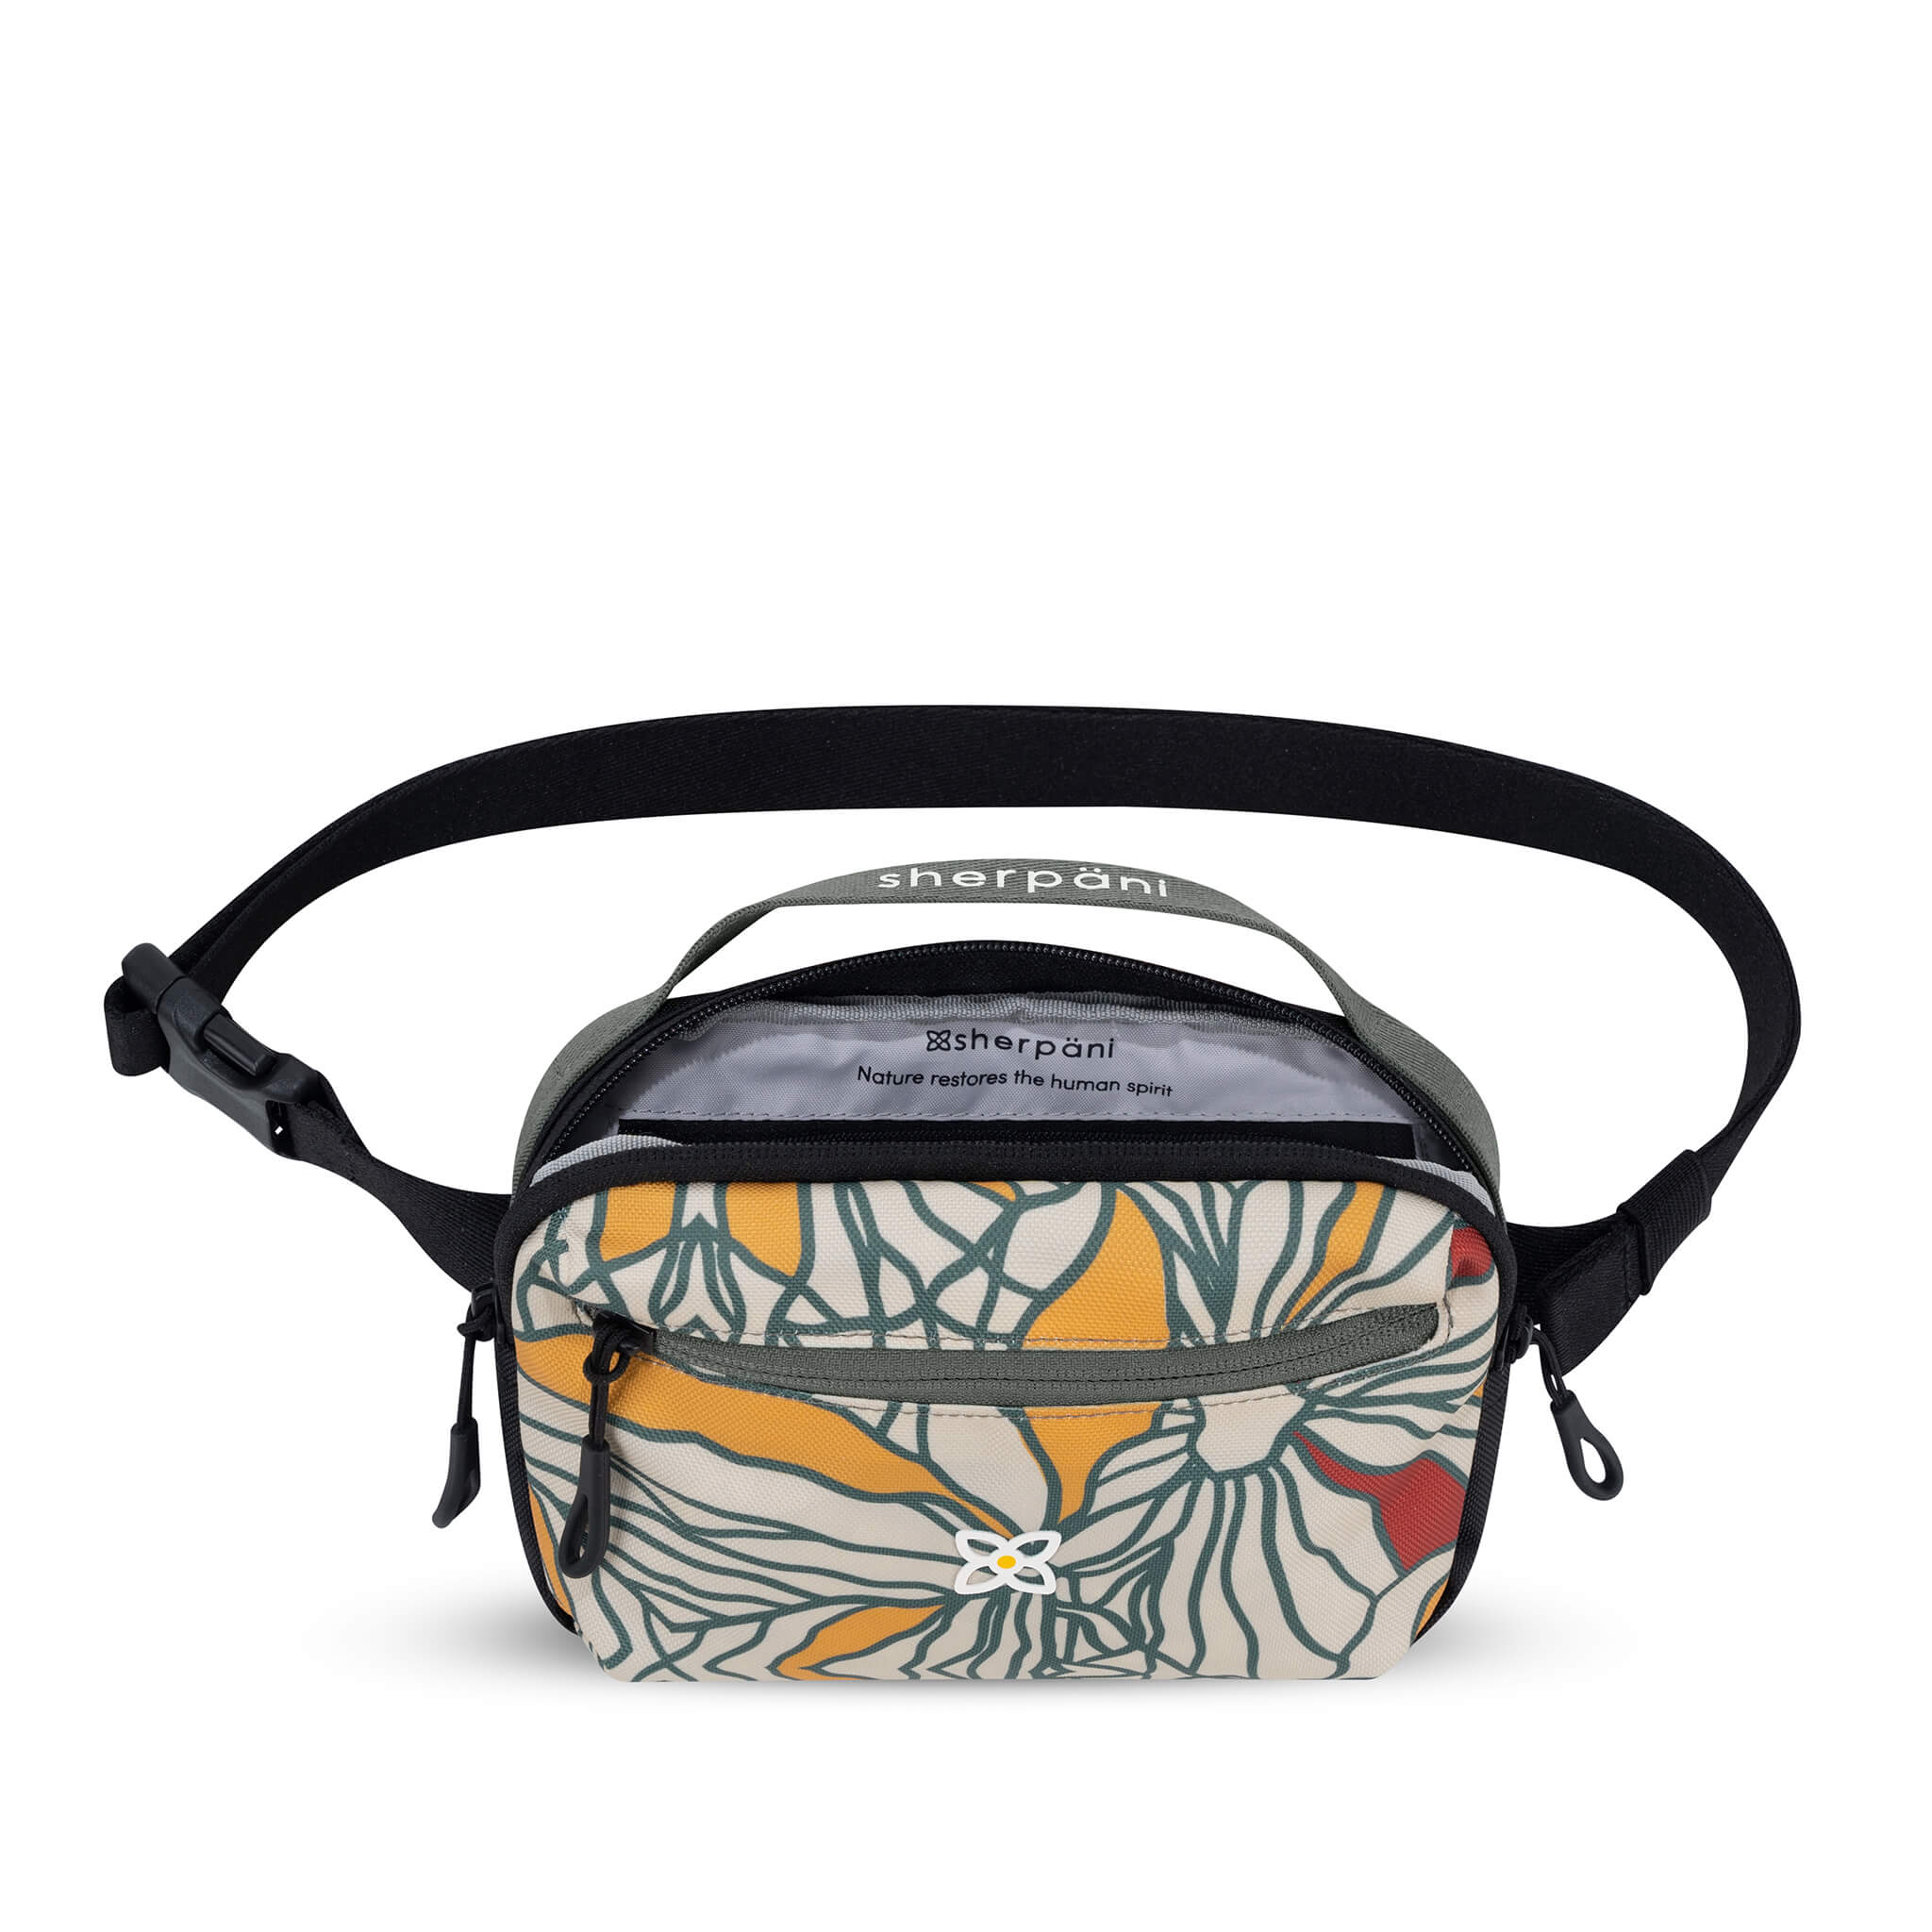 Top view of Sherpani&#39;s waist pack, the Hyk in Fiori. The main bag compartment is open to reveal a light gray interior and inside zipper pocket.